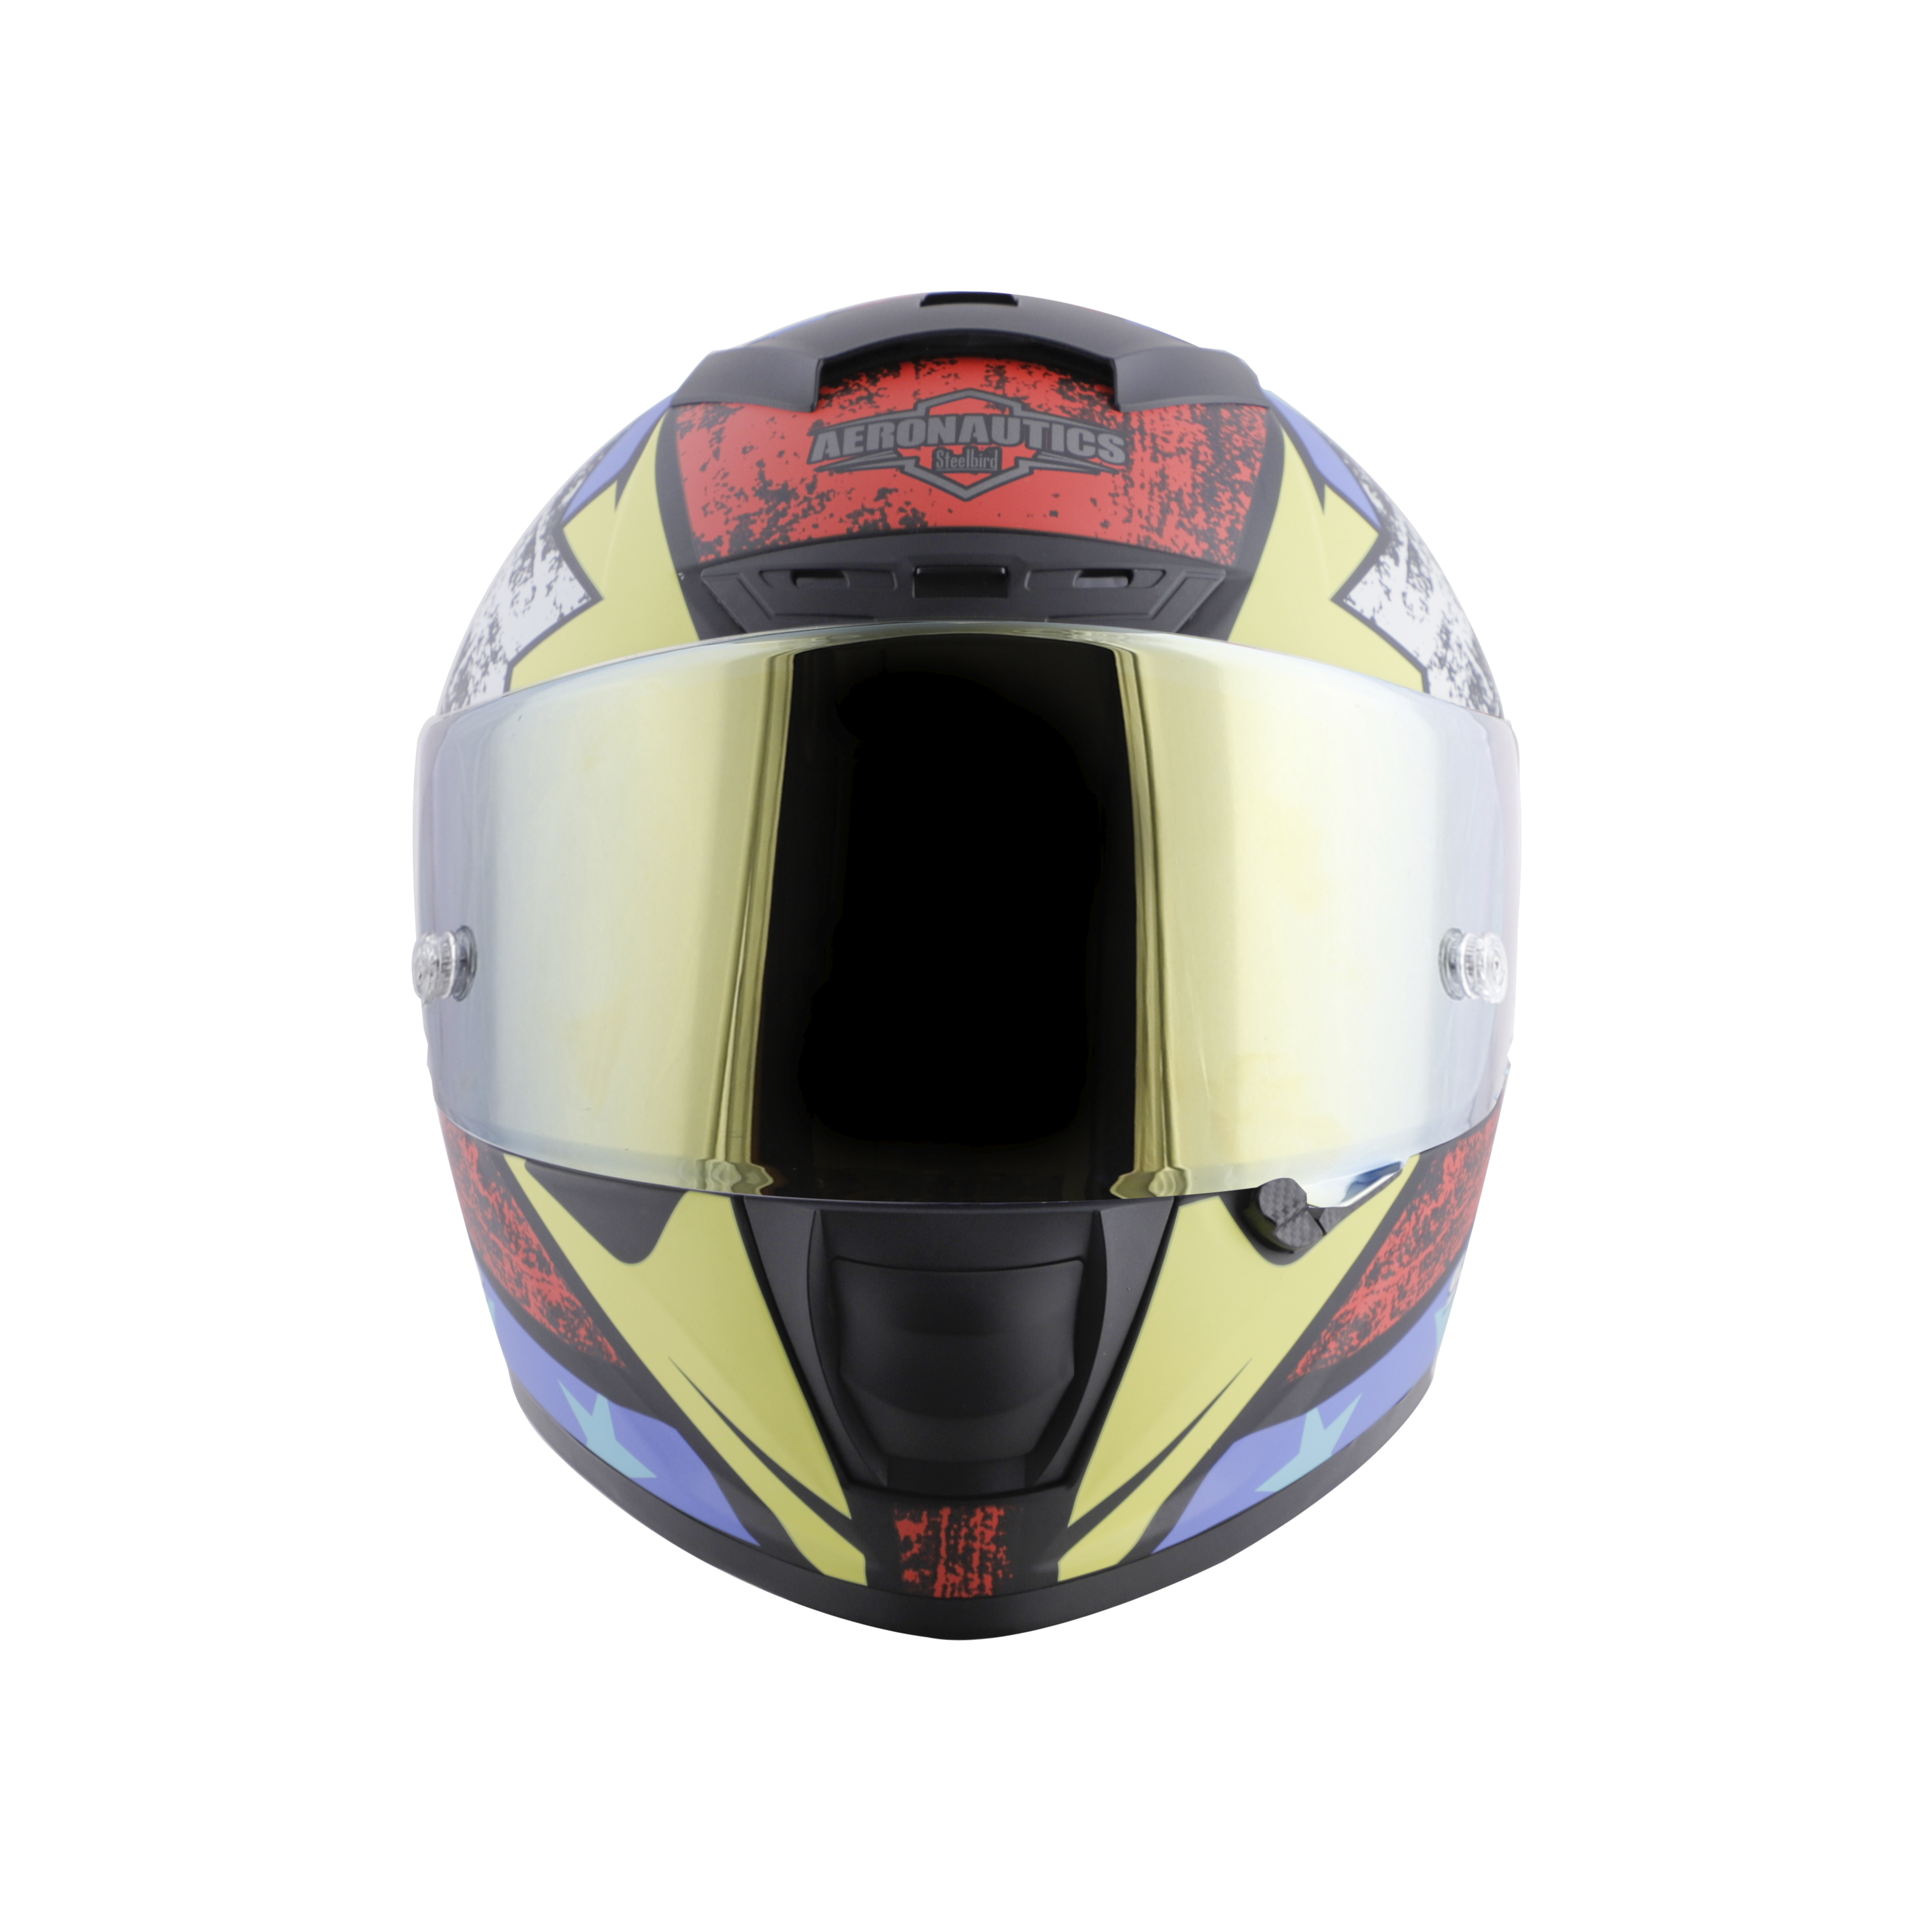 SA-2 STAR MAT BLACK WITH RED FITTED WITH CLEAR VISOR EXTRA CHROME GOLD VISOR FREE (WITH ANTI-FOG SHIELD HOLDER)